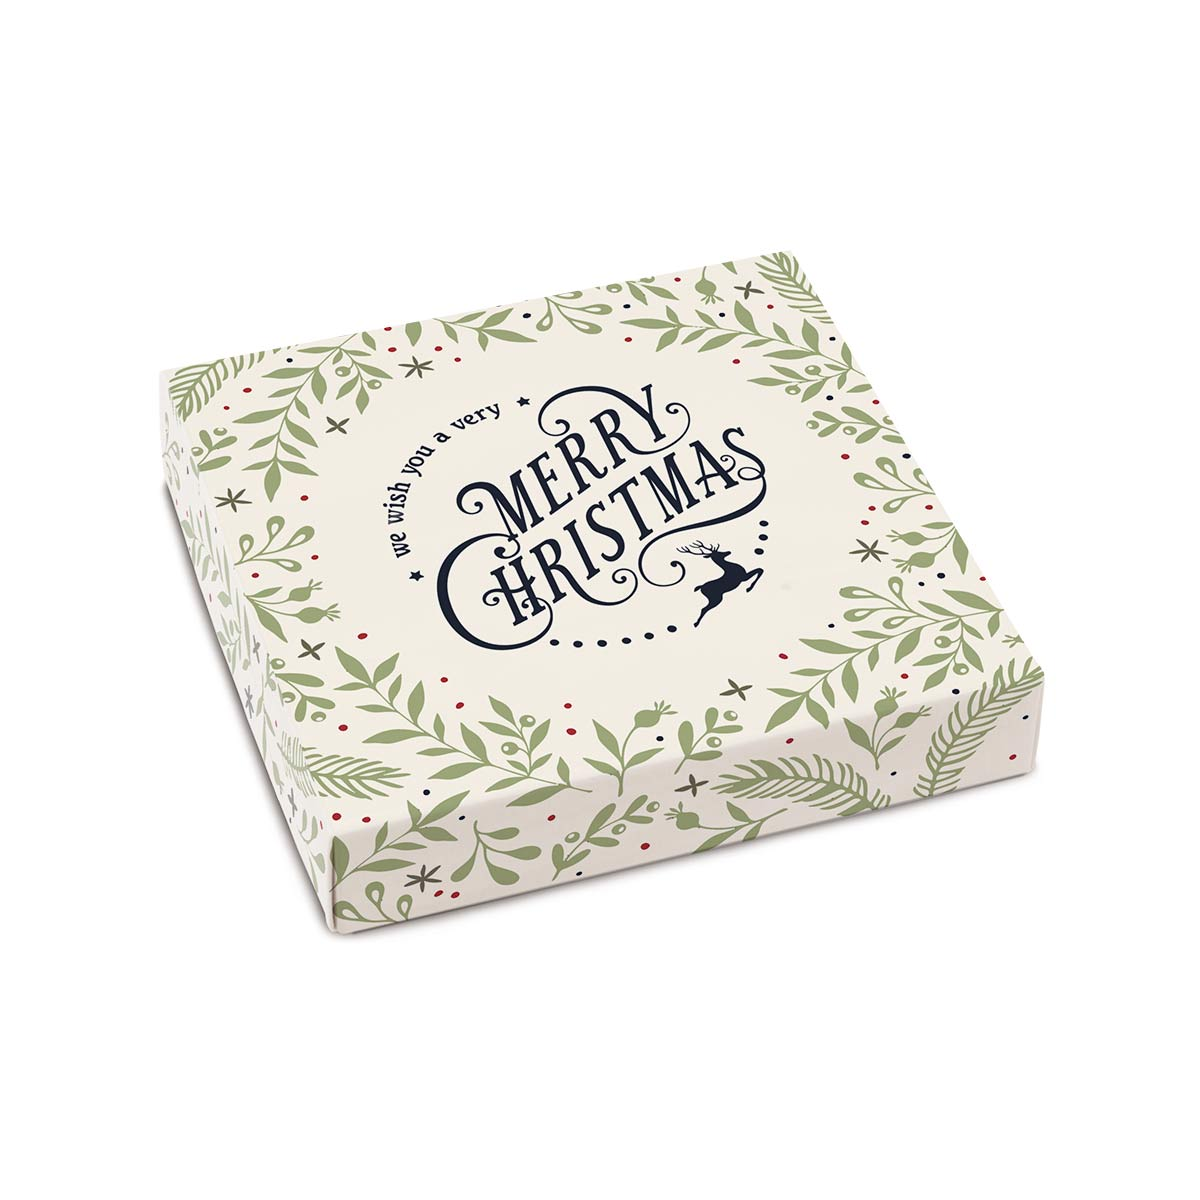 Very Merry Christmas Themed Box Cover for 9 Piece Holiday Assortment